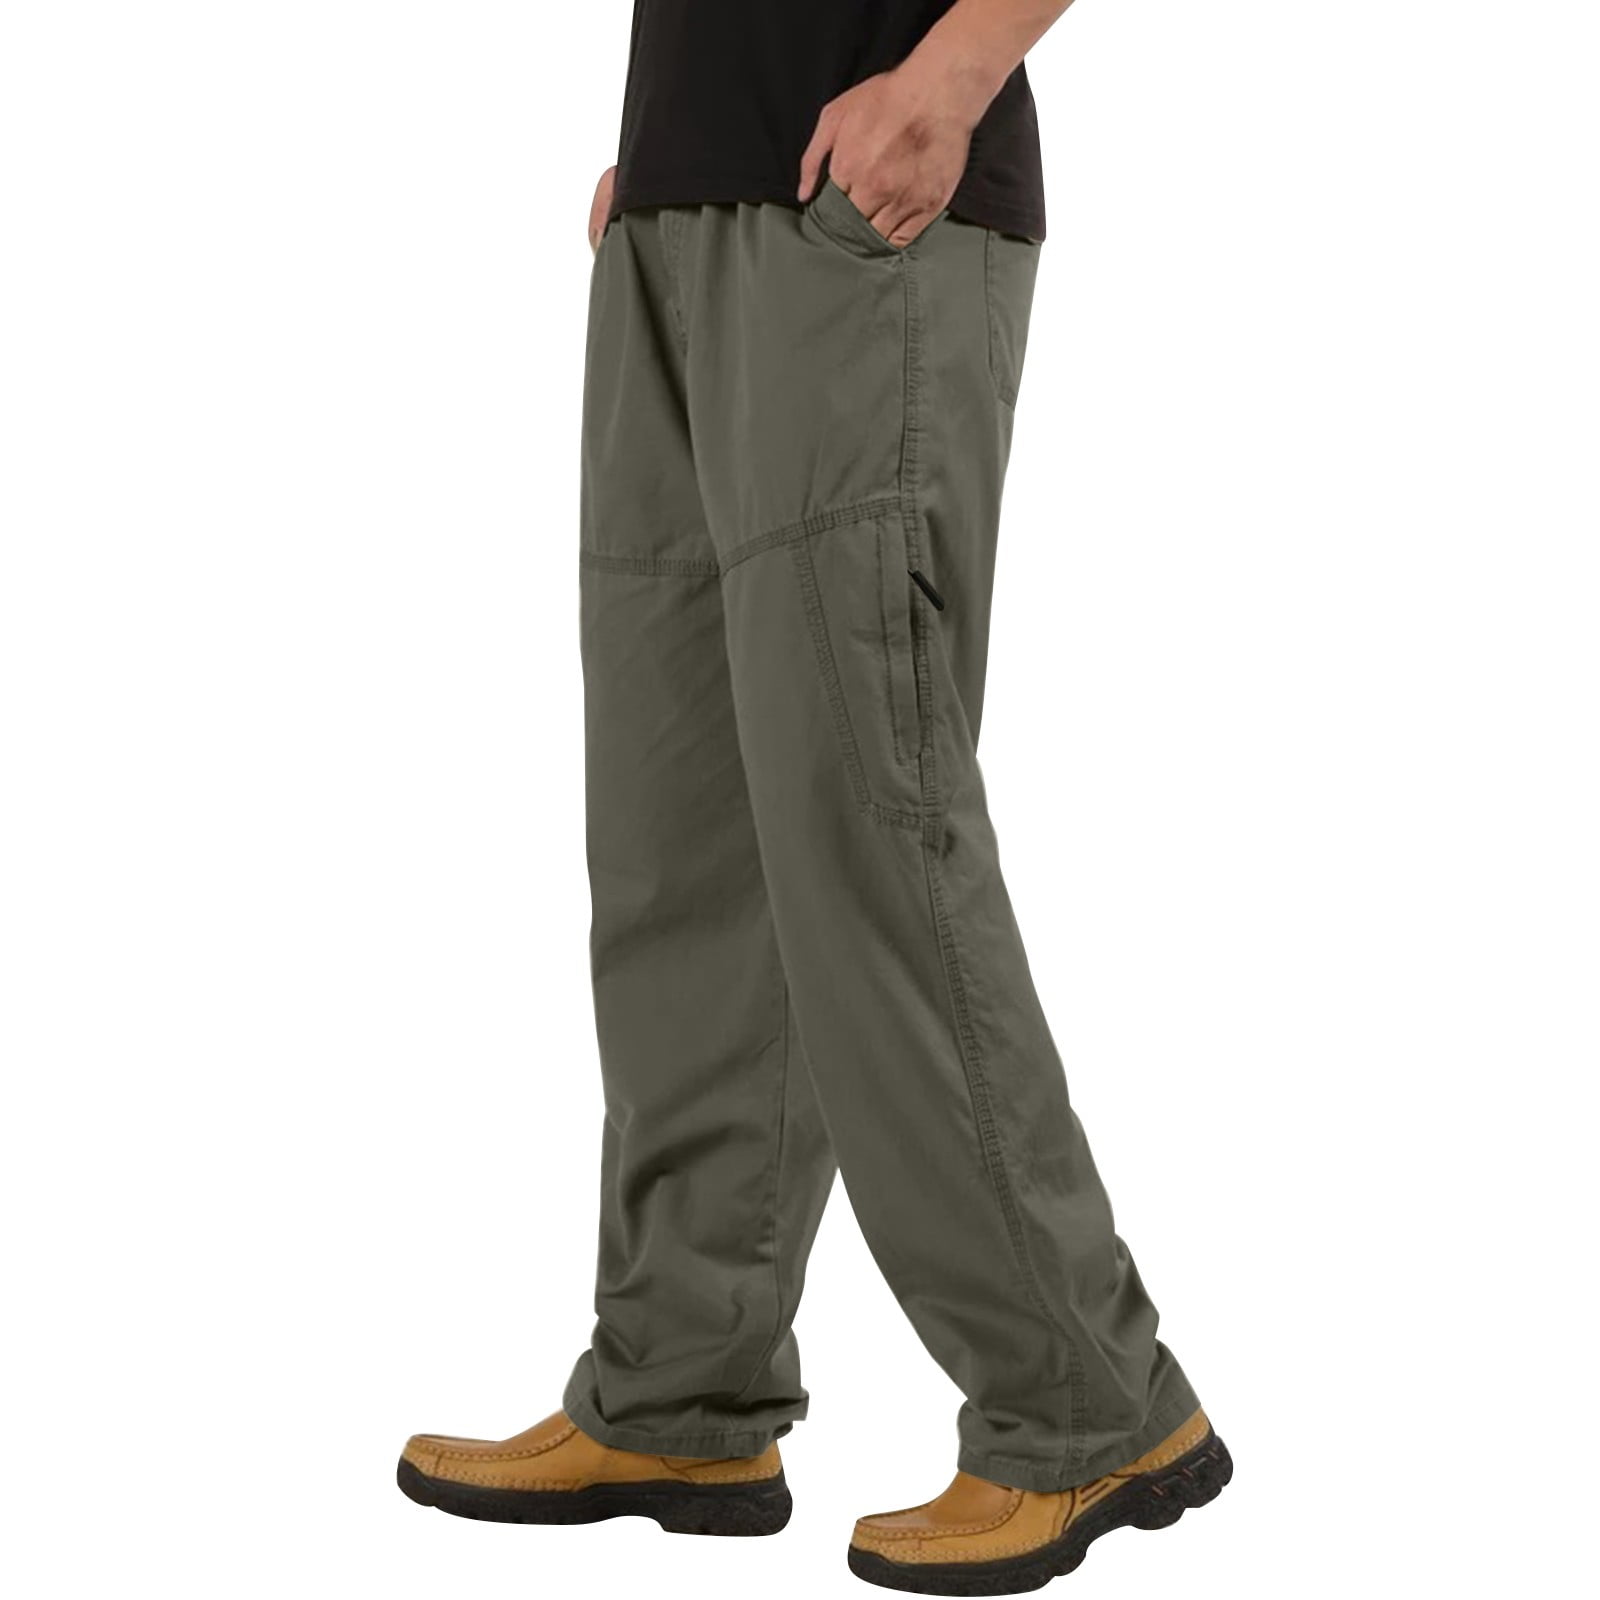 Sngxgn Mens Cargo Pants Relaxed Fit Men's Relaxed Fit Comfort Pants ...